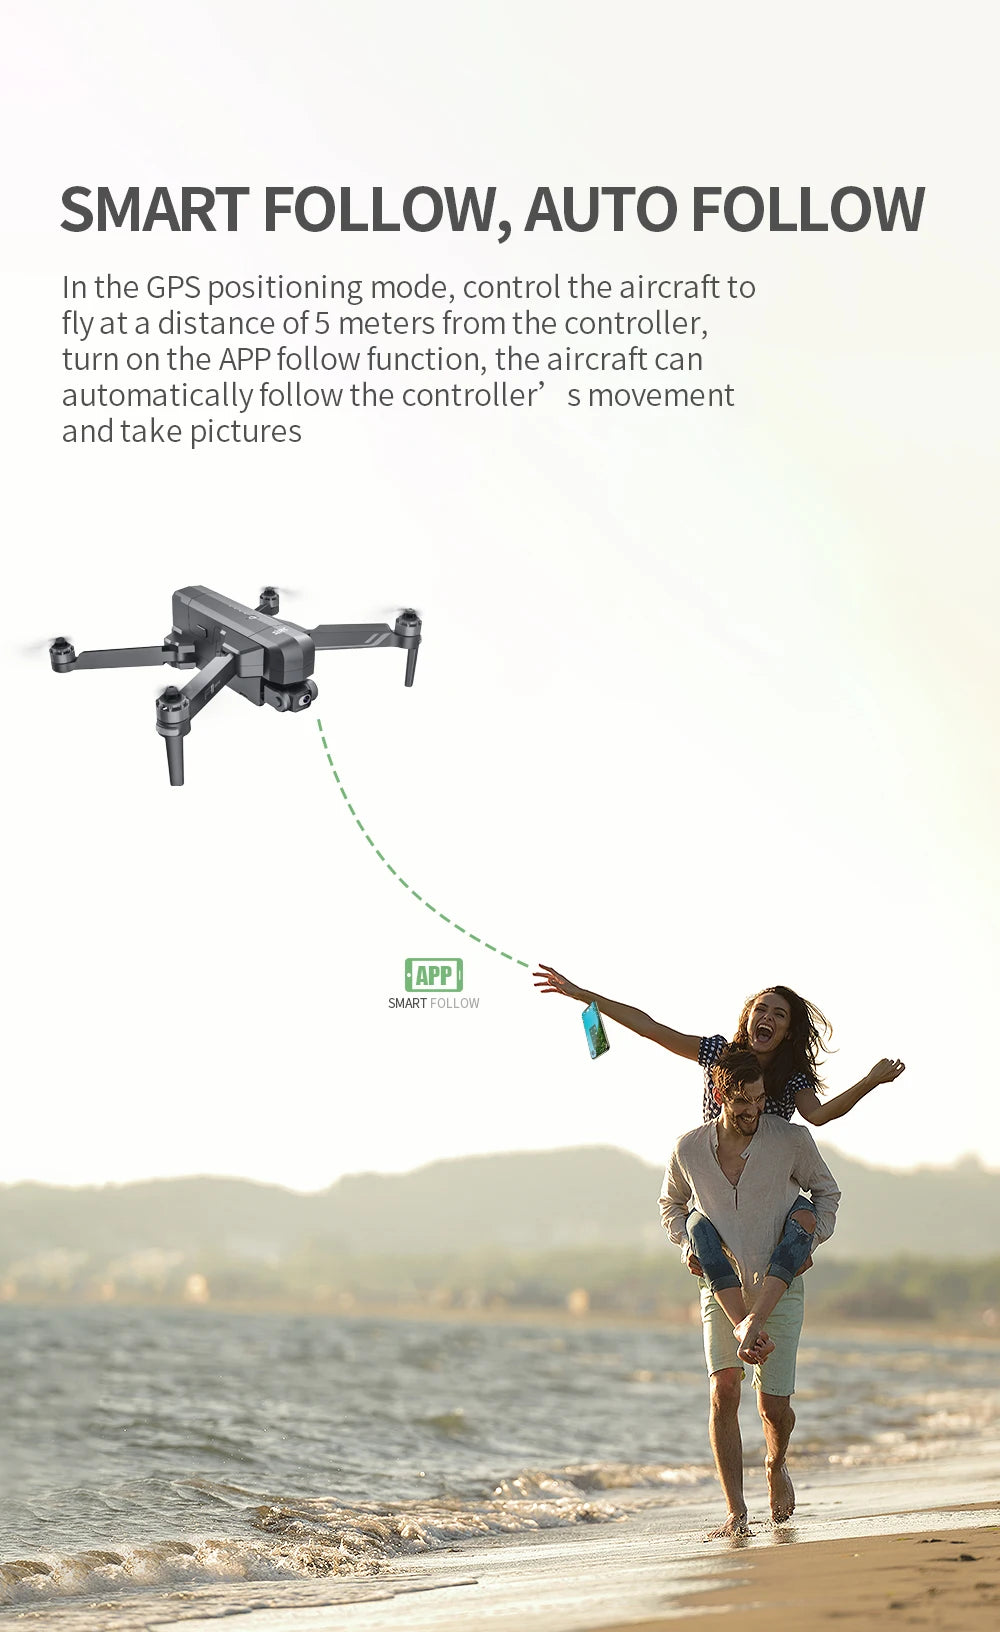 F11S PRO Drone, turn on the APP follow function; the aircraft can follow the controller' s movement 